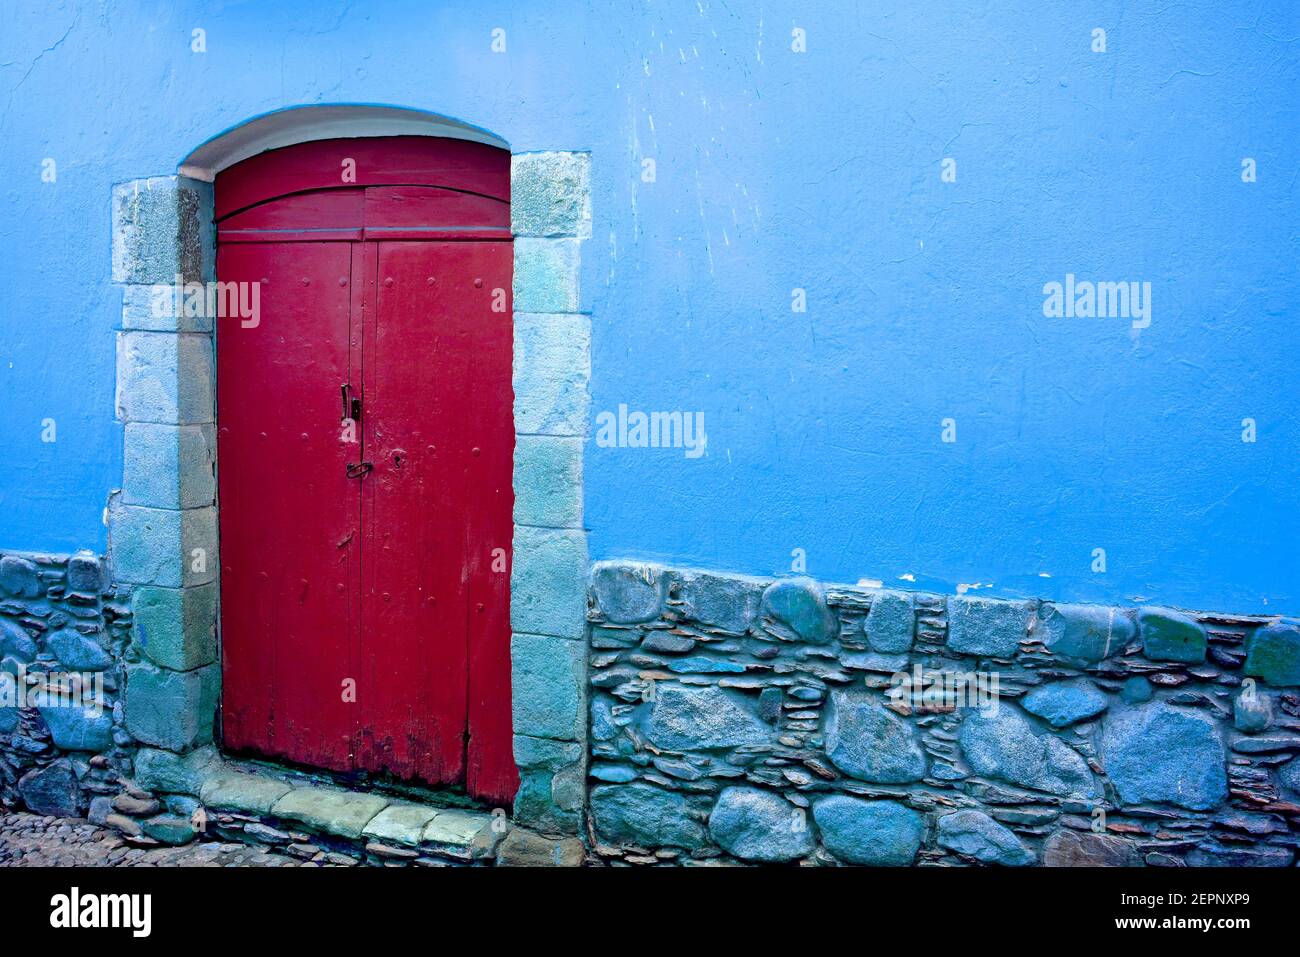 Red wooden door on blue wall of an old building Stock Photo